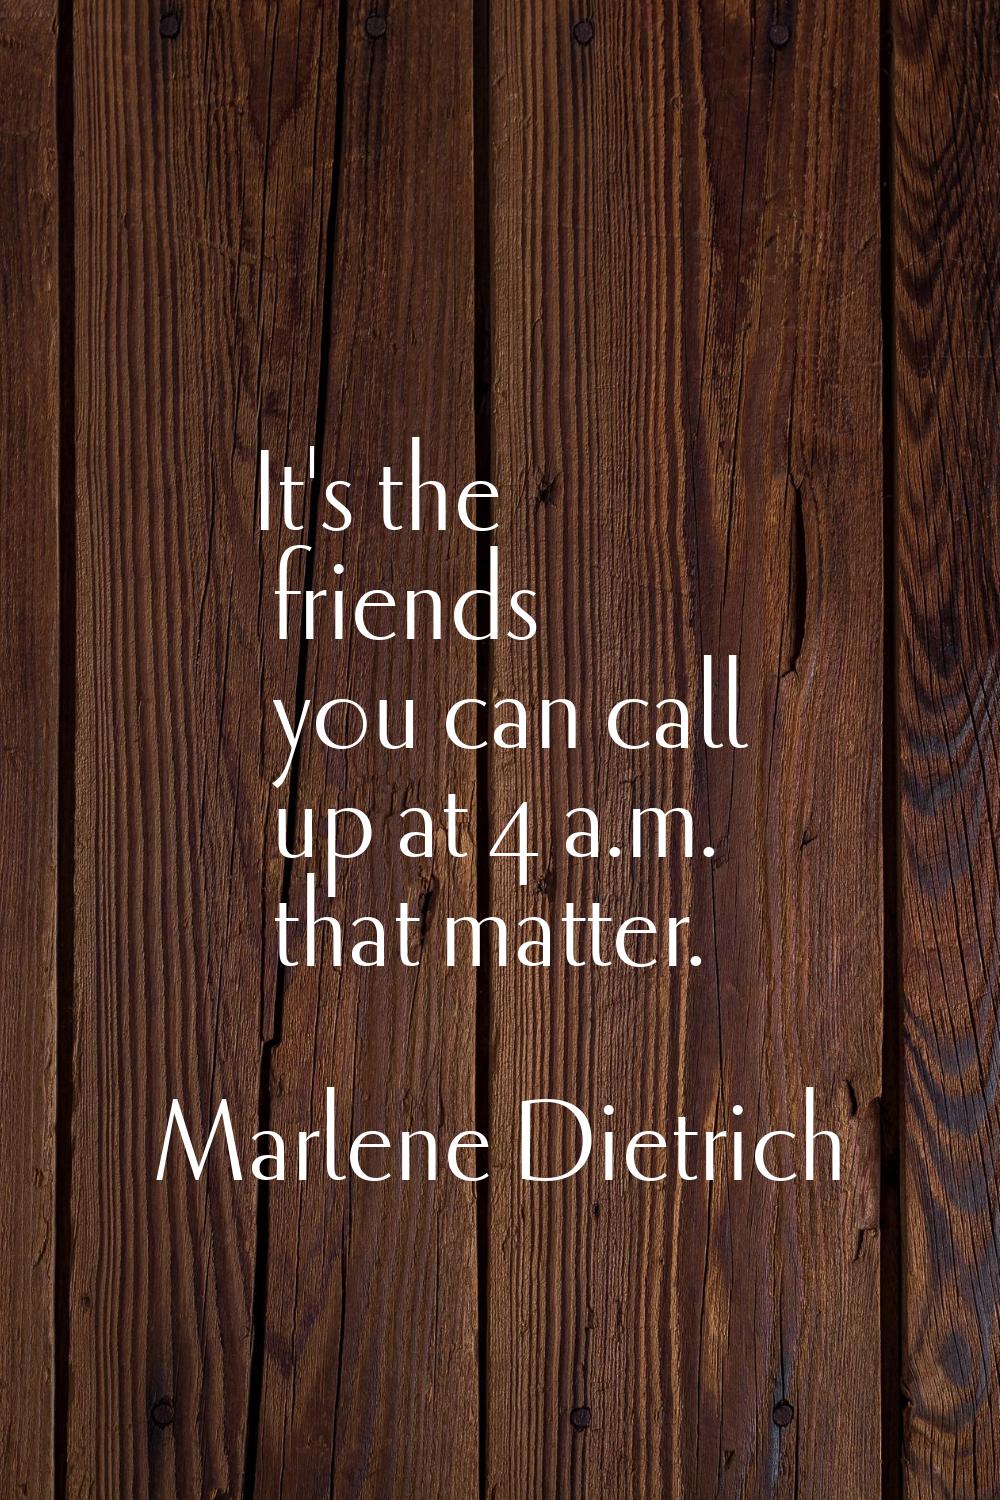 It's the friends you can call up at 4 a.m. that matter.